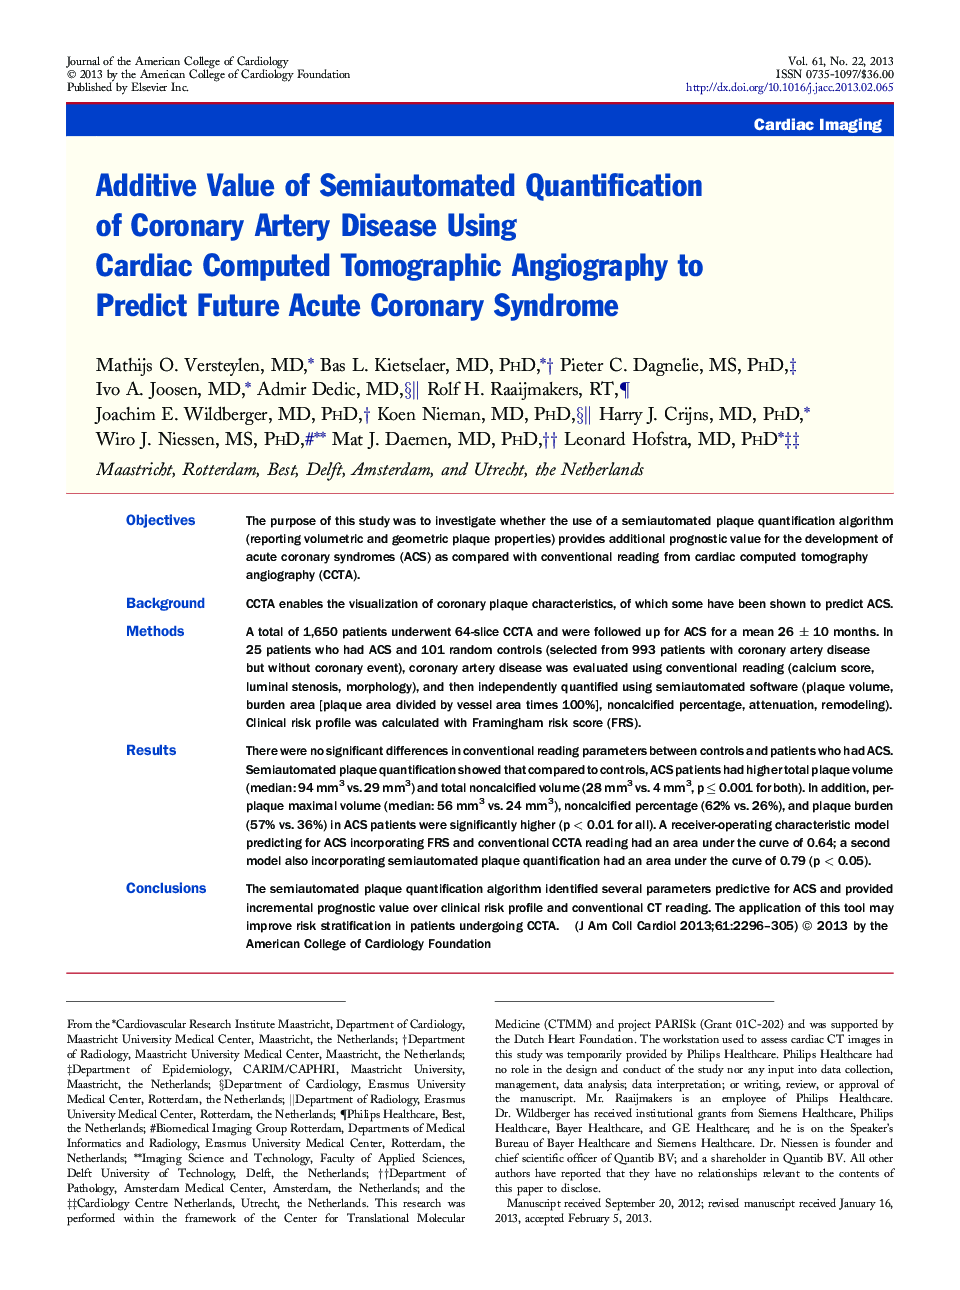 Additive Value of Semiautomated Quantification of Coronary Artery Disease Using Cardiac Computed Tomographic Angiography to Predict Future Acute Coronary Syndrome 